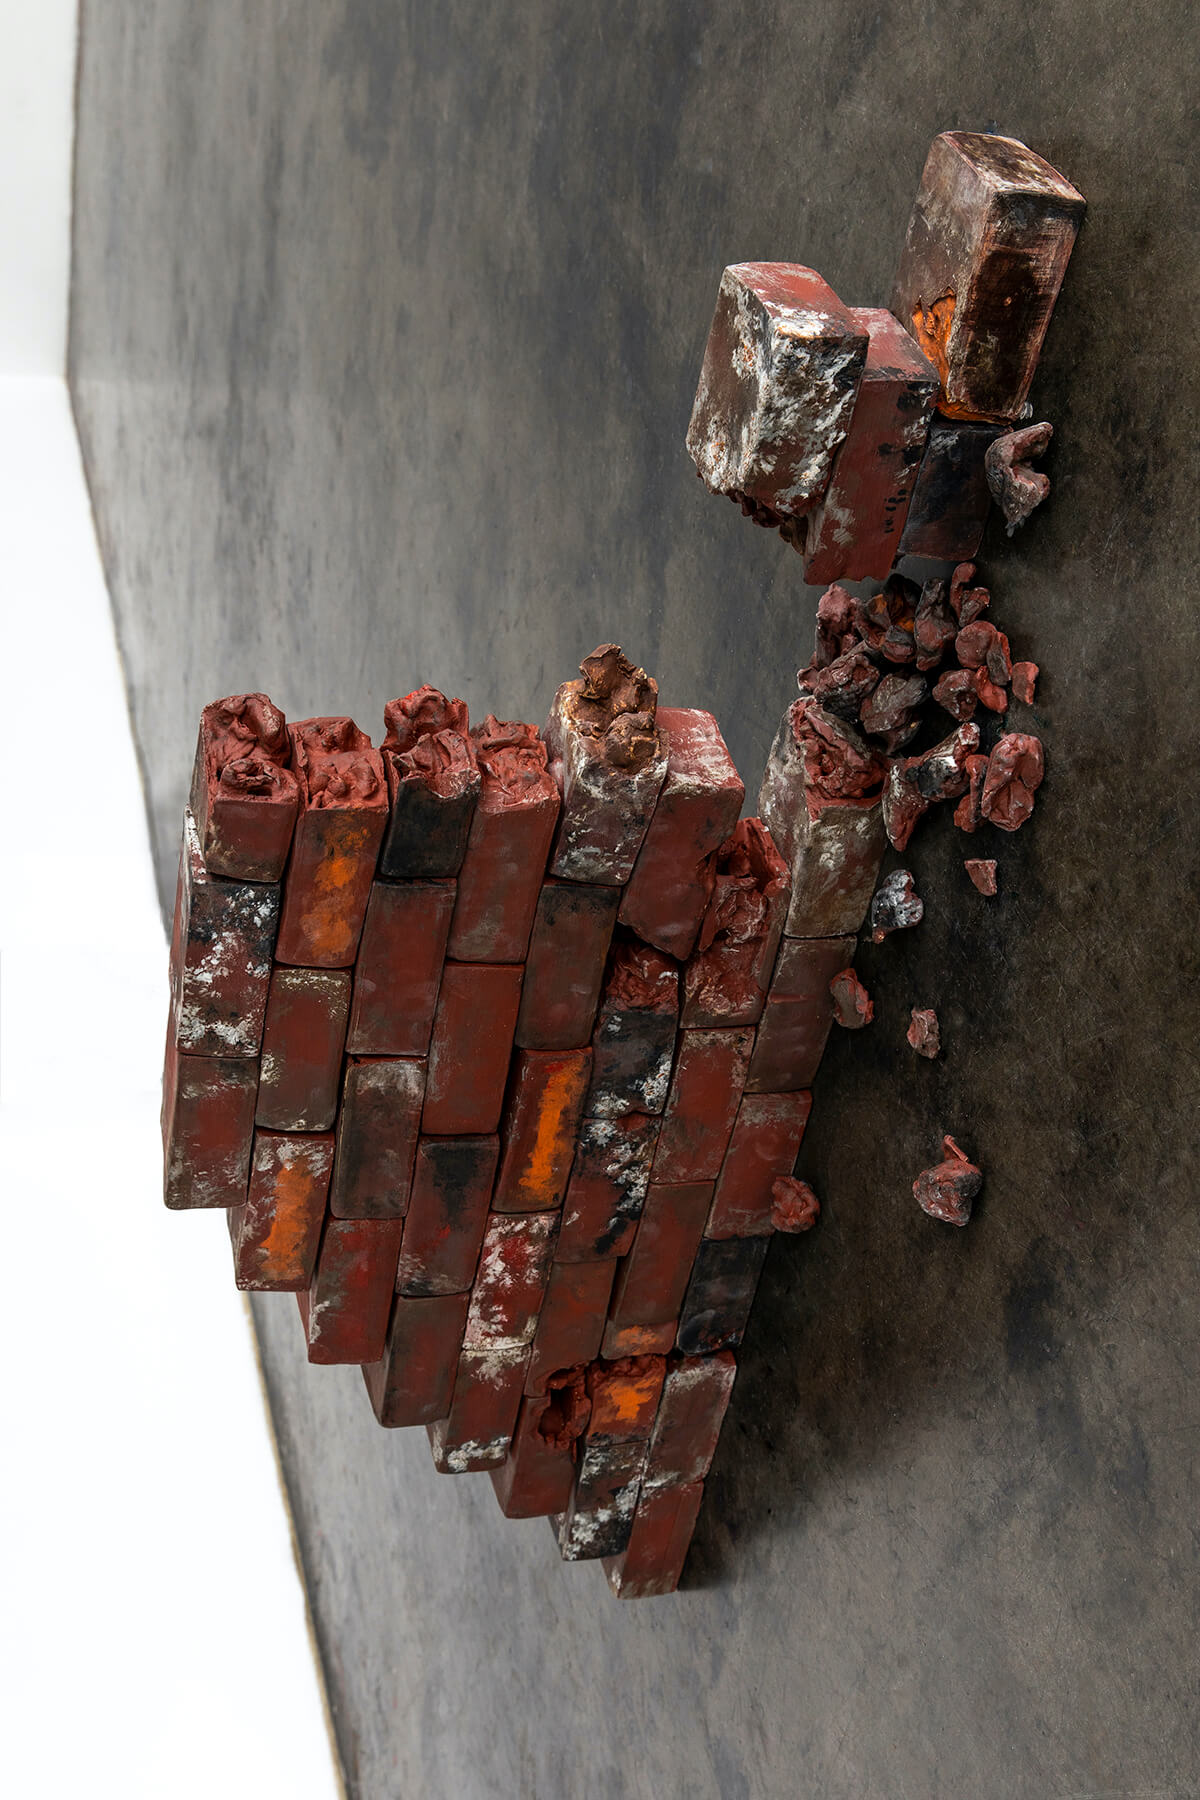 A photograph, interior to an art gallery. On the floor is a stack of rough bricks, mostly dark red but with some white, orange, and black paint. They are arranfed into a small triangular 'wall,' one brick thick, with a portion of the wall missing or collapsed, and on the smooth floor fragments of brick are scattered.